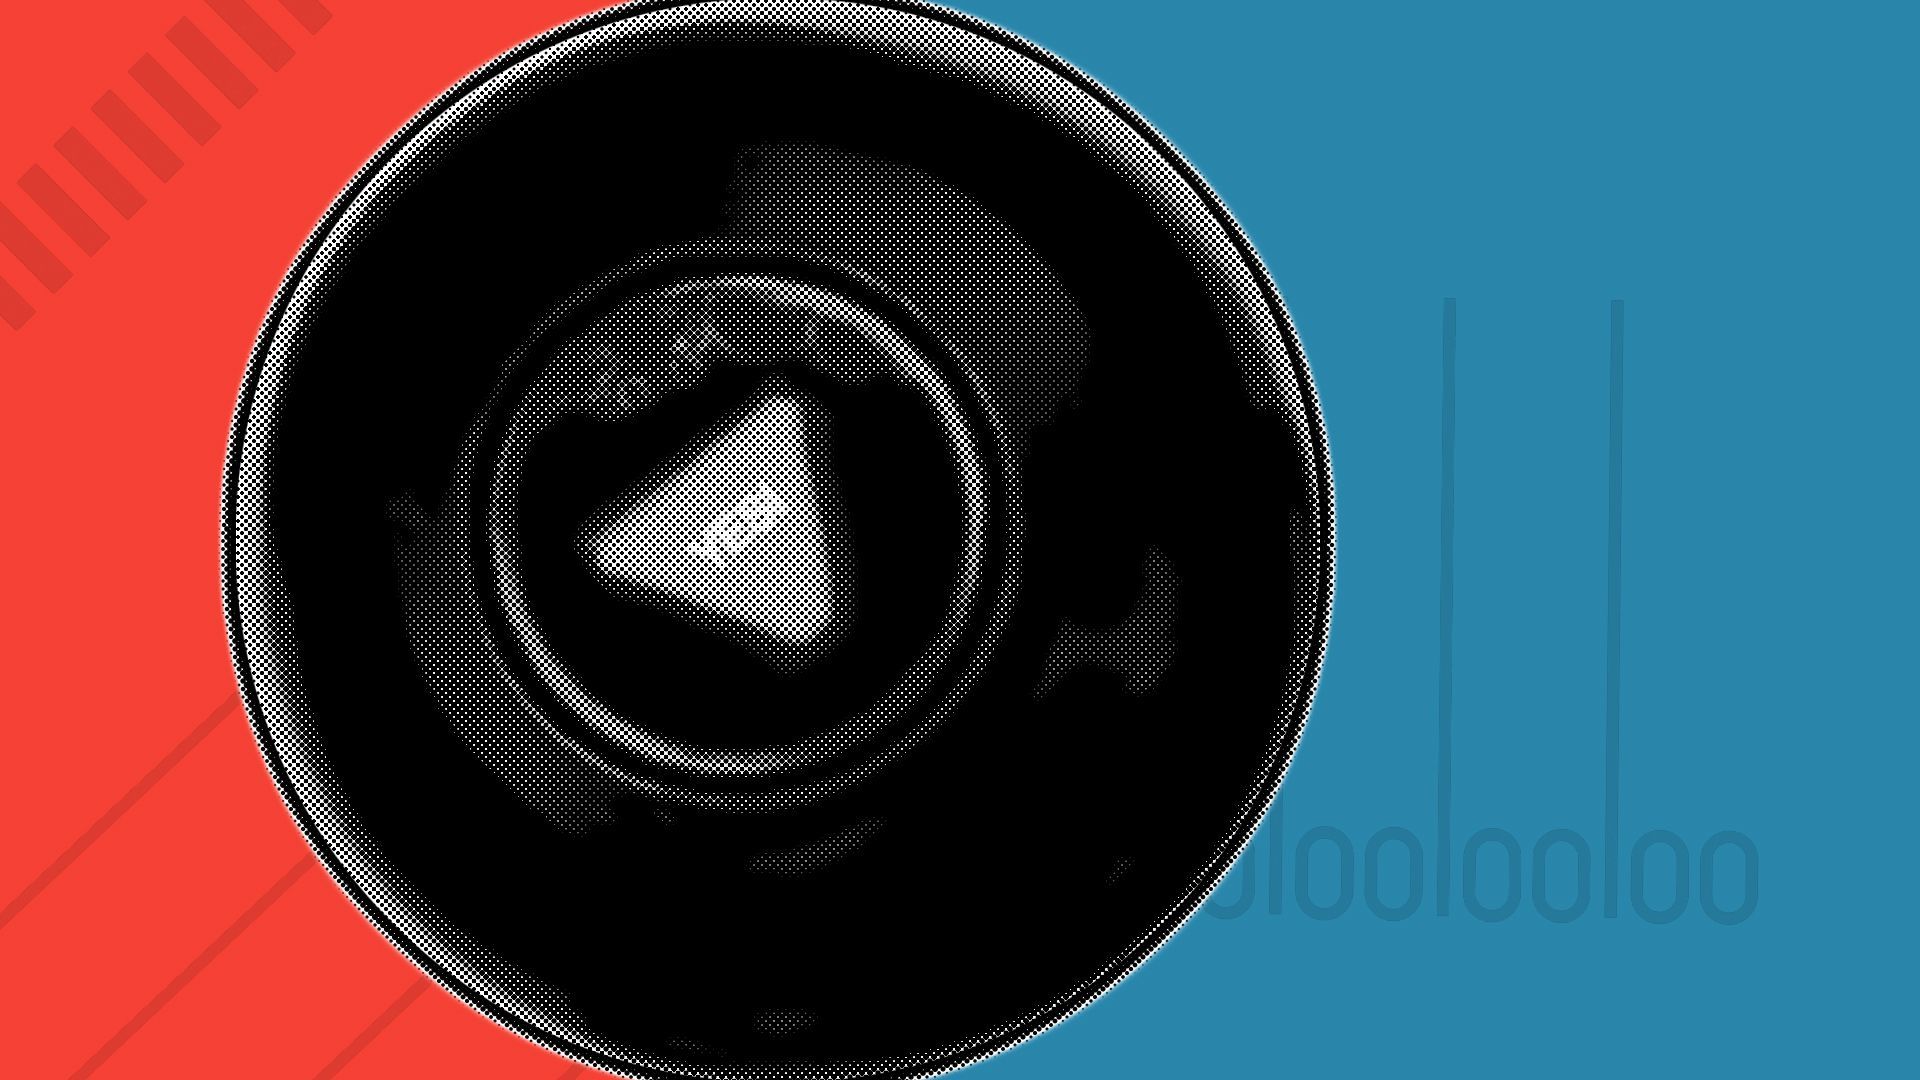 Illustration of a magic eight ball revealing the word 